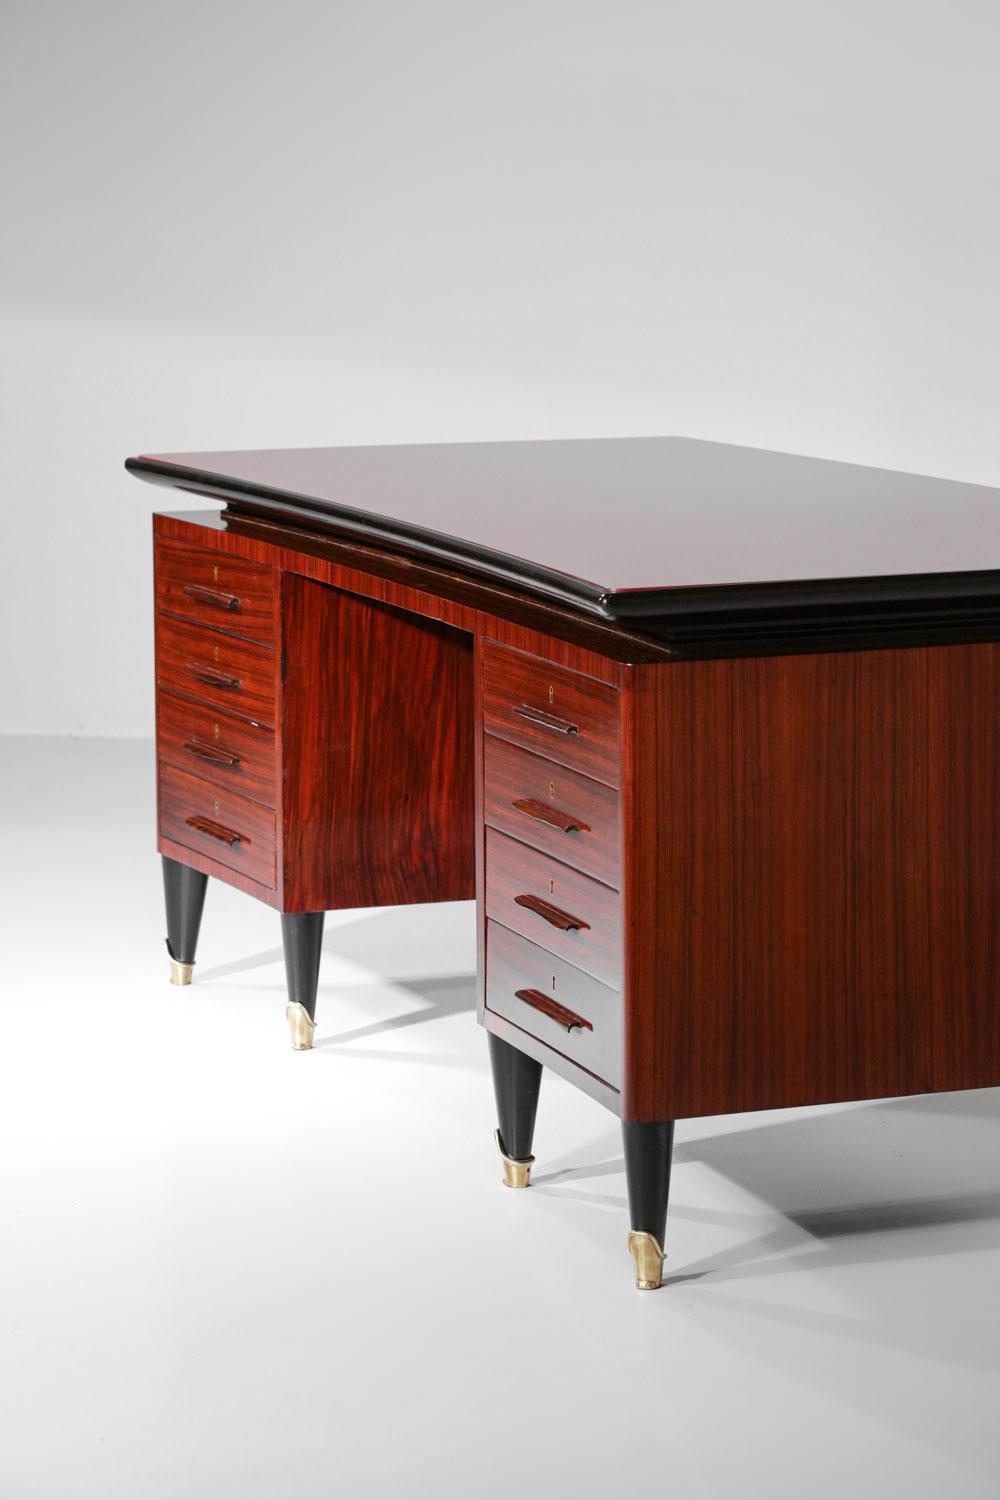 Mid-20th Century Italian large Desk by Vittorio Dassi solid wood and glass 60s - G725 For Sale